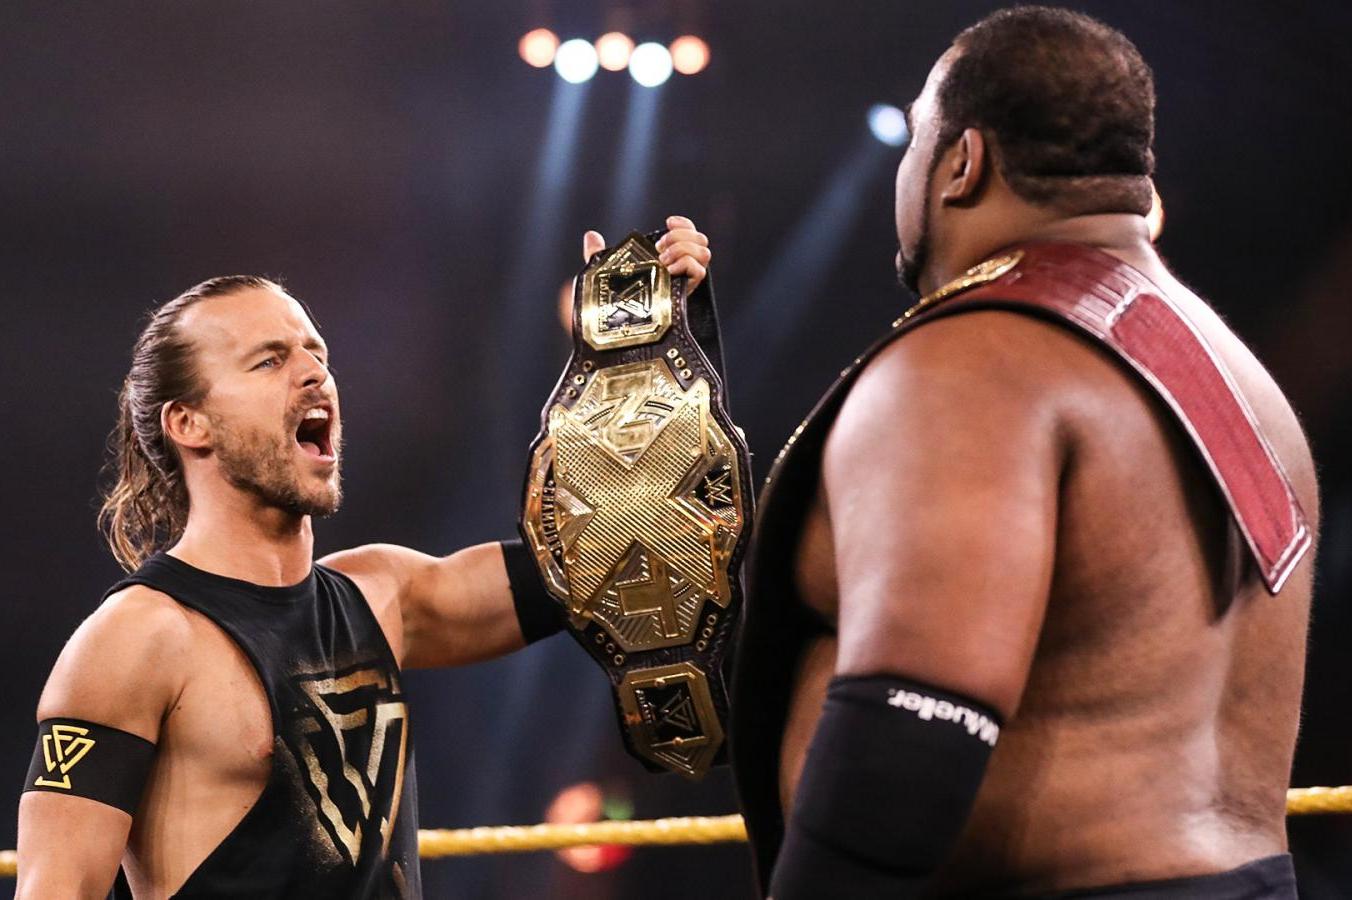 Keith Lee Beats Adam to Win NXT Retain American Title Bleacher Report | Latest News, Videos and Highlights